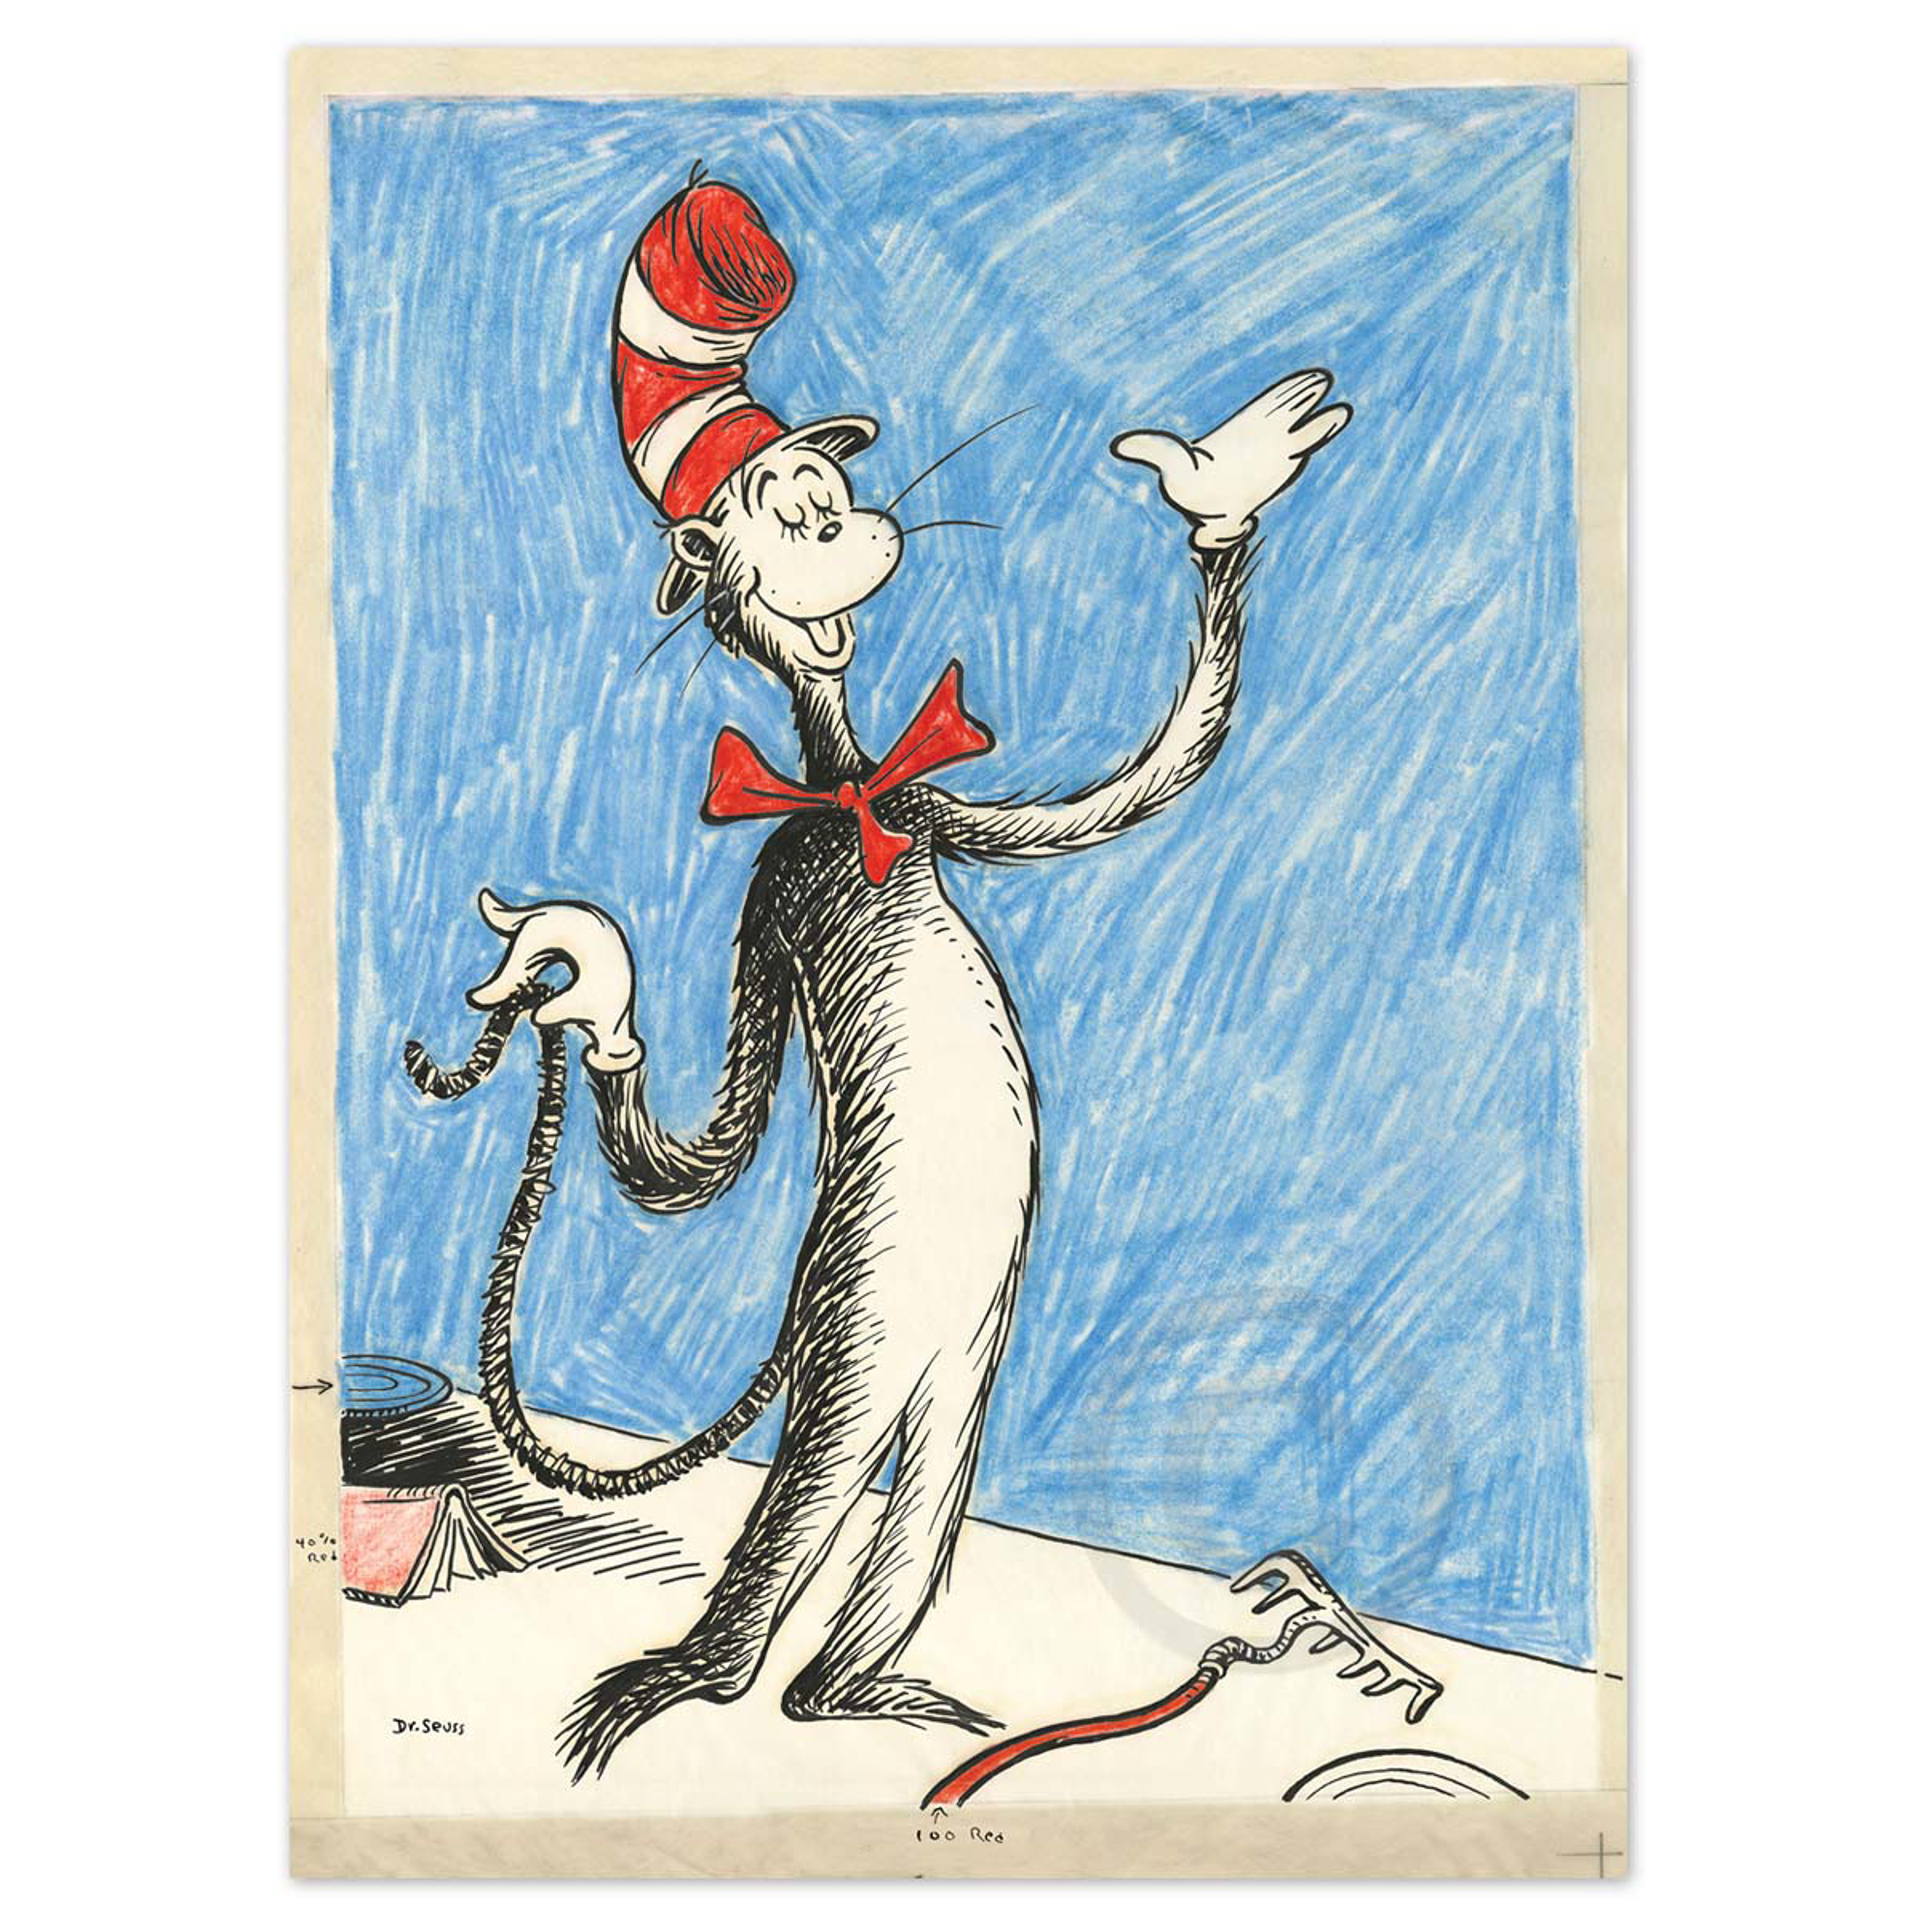 The Cat In The Hat (The Cat That Changed The World) by Dr. Seuss